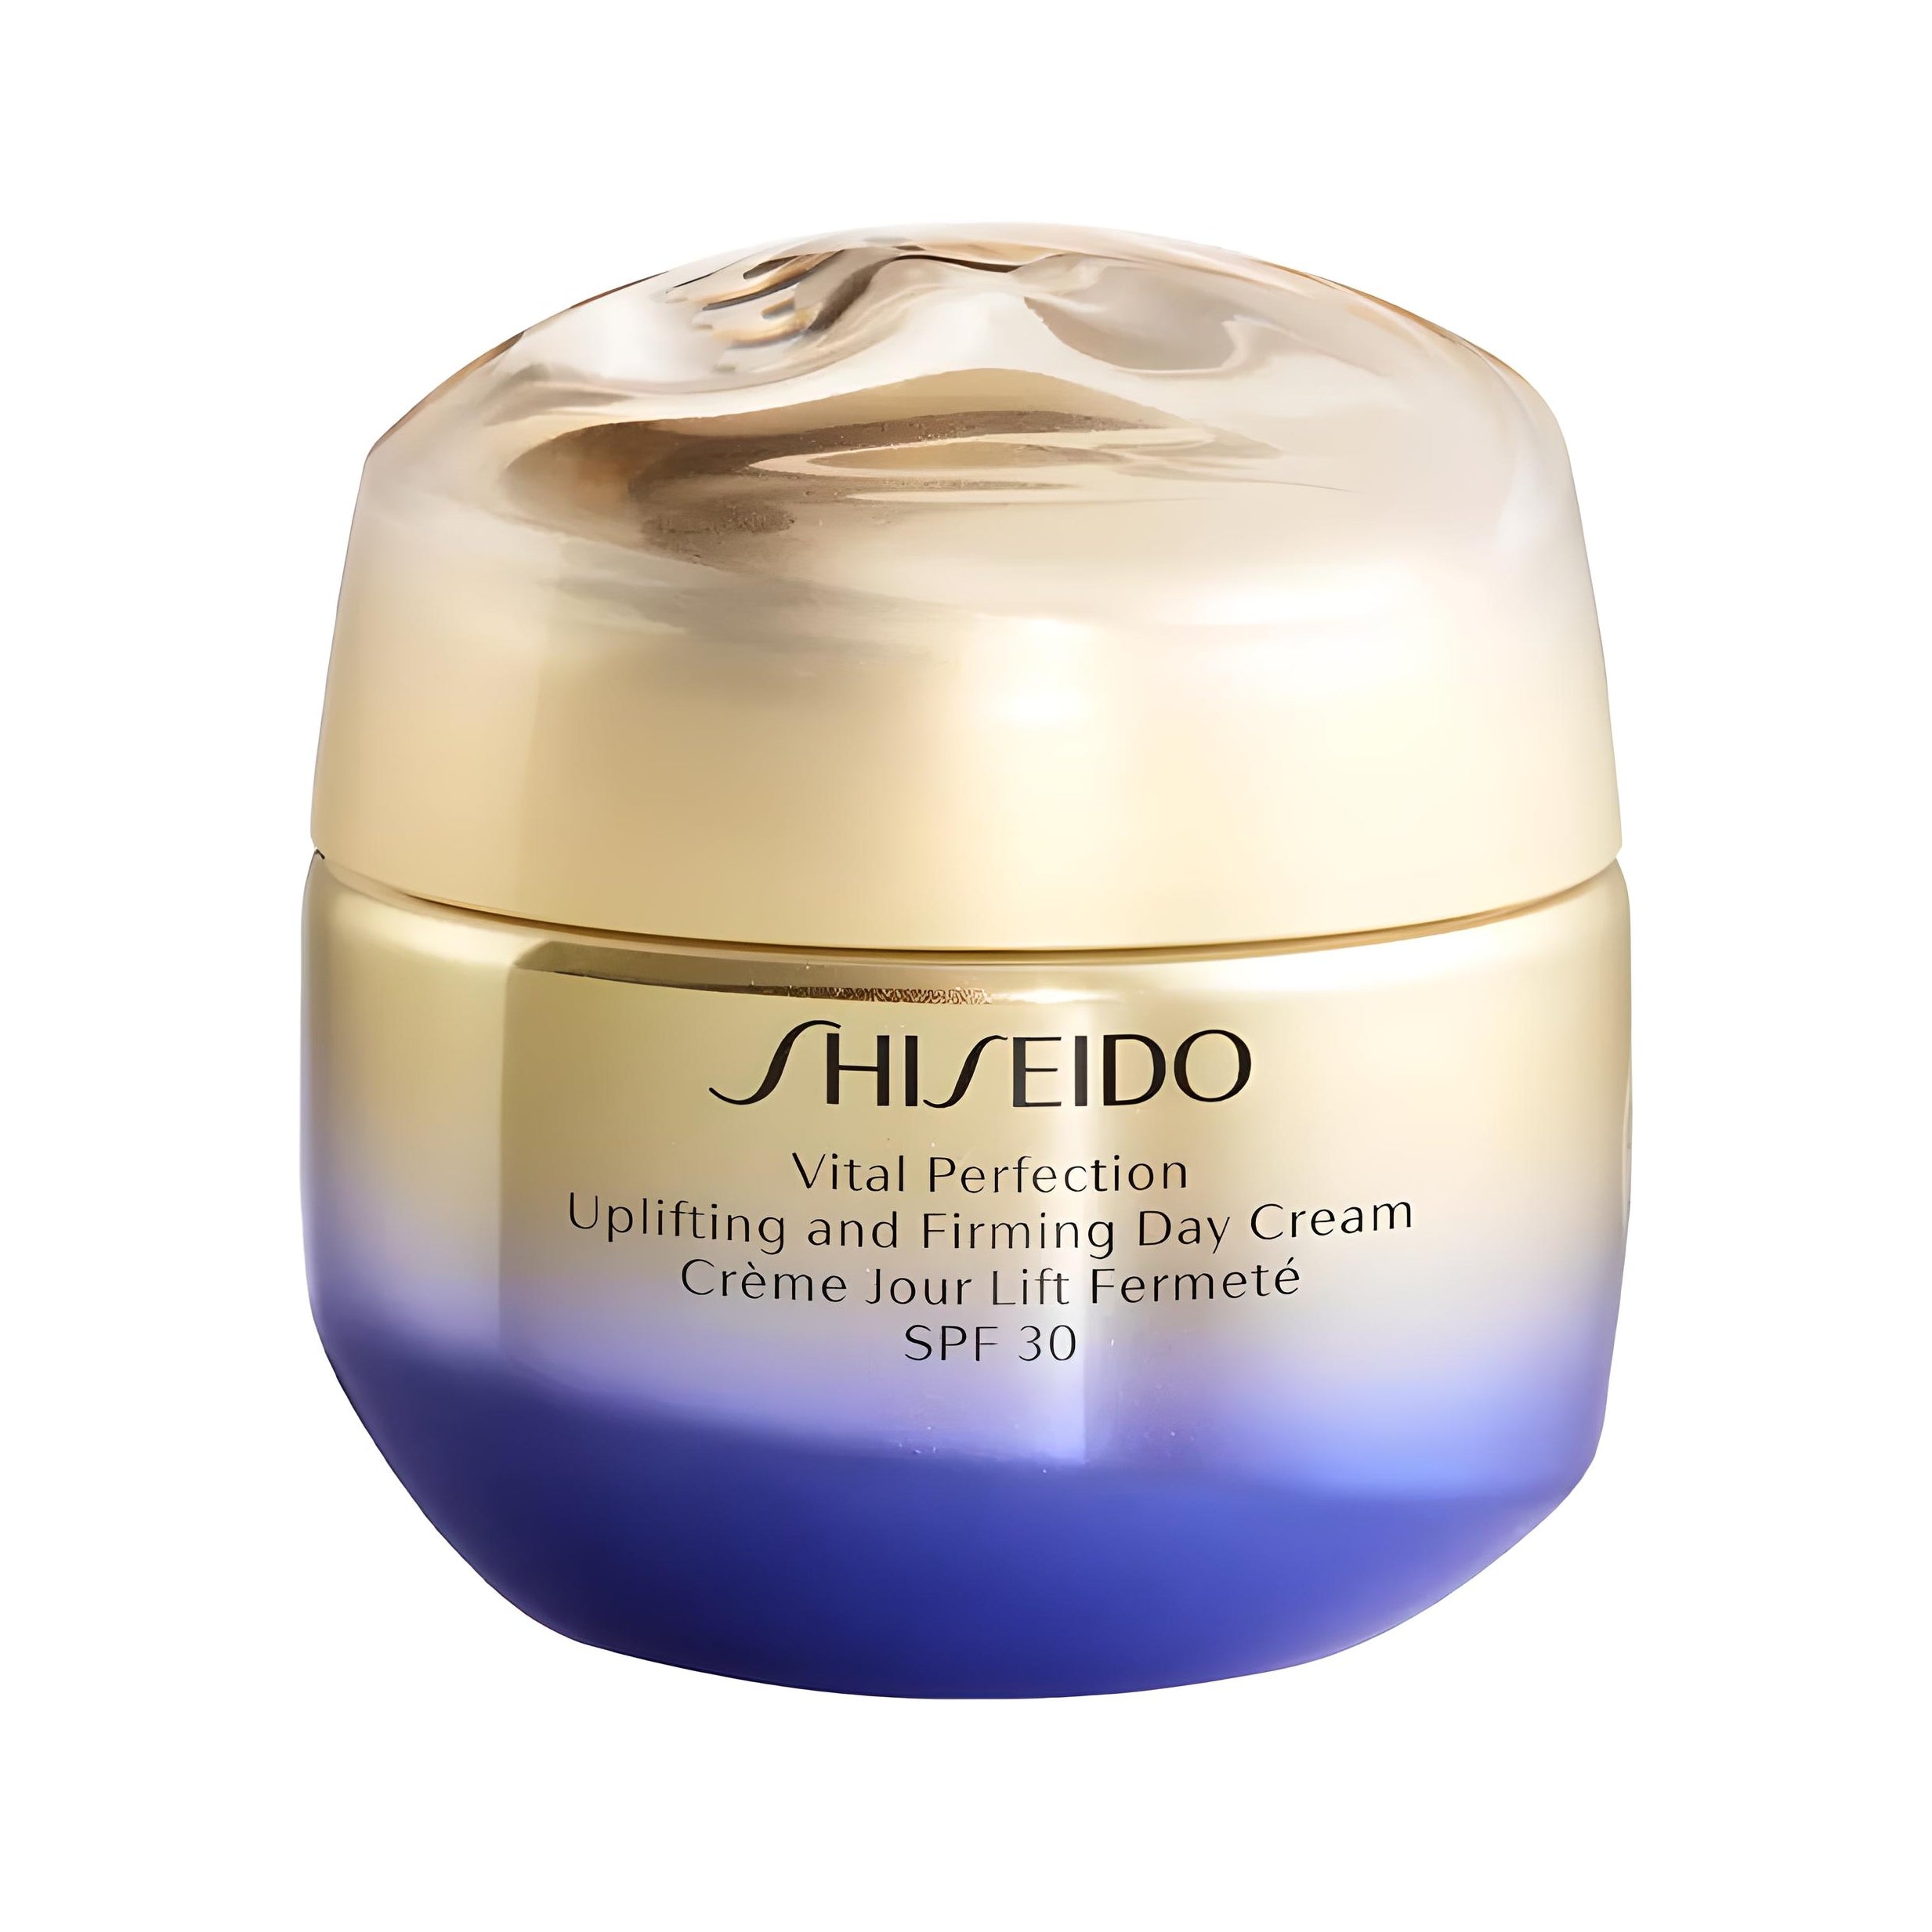 VITAL PERFECTION uplifting & firming day cream SPF30